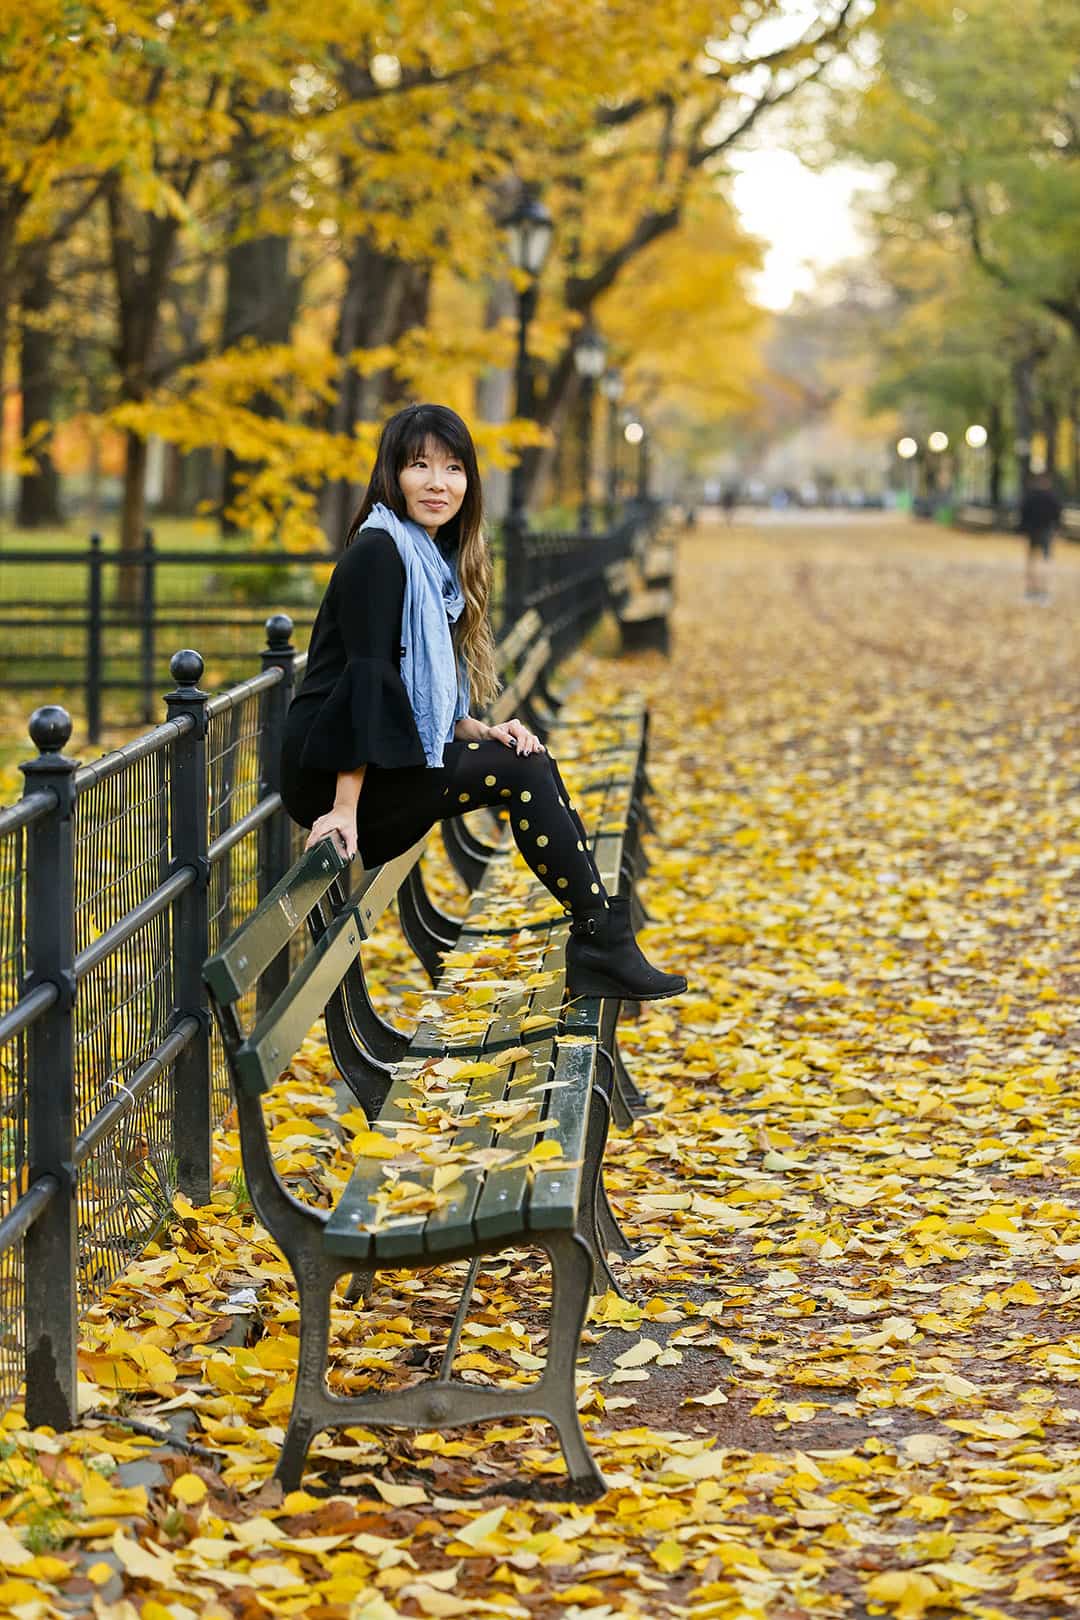 Central Park Photo Spots in Fall + 25 Best Places to Photograph in NYC